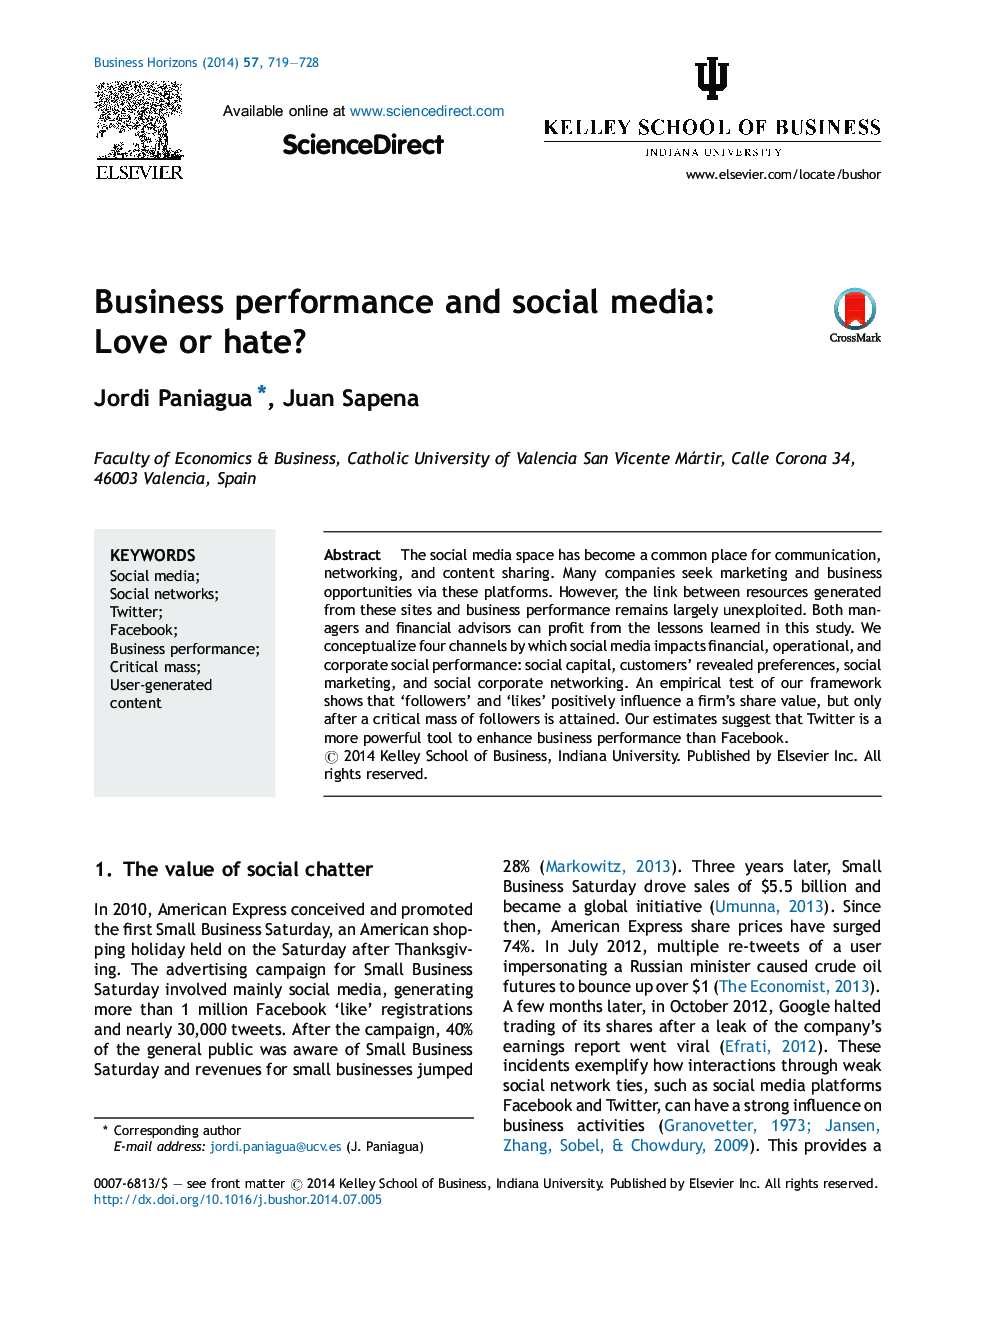 Business performance and social media: Love or hate?